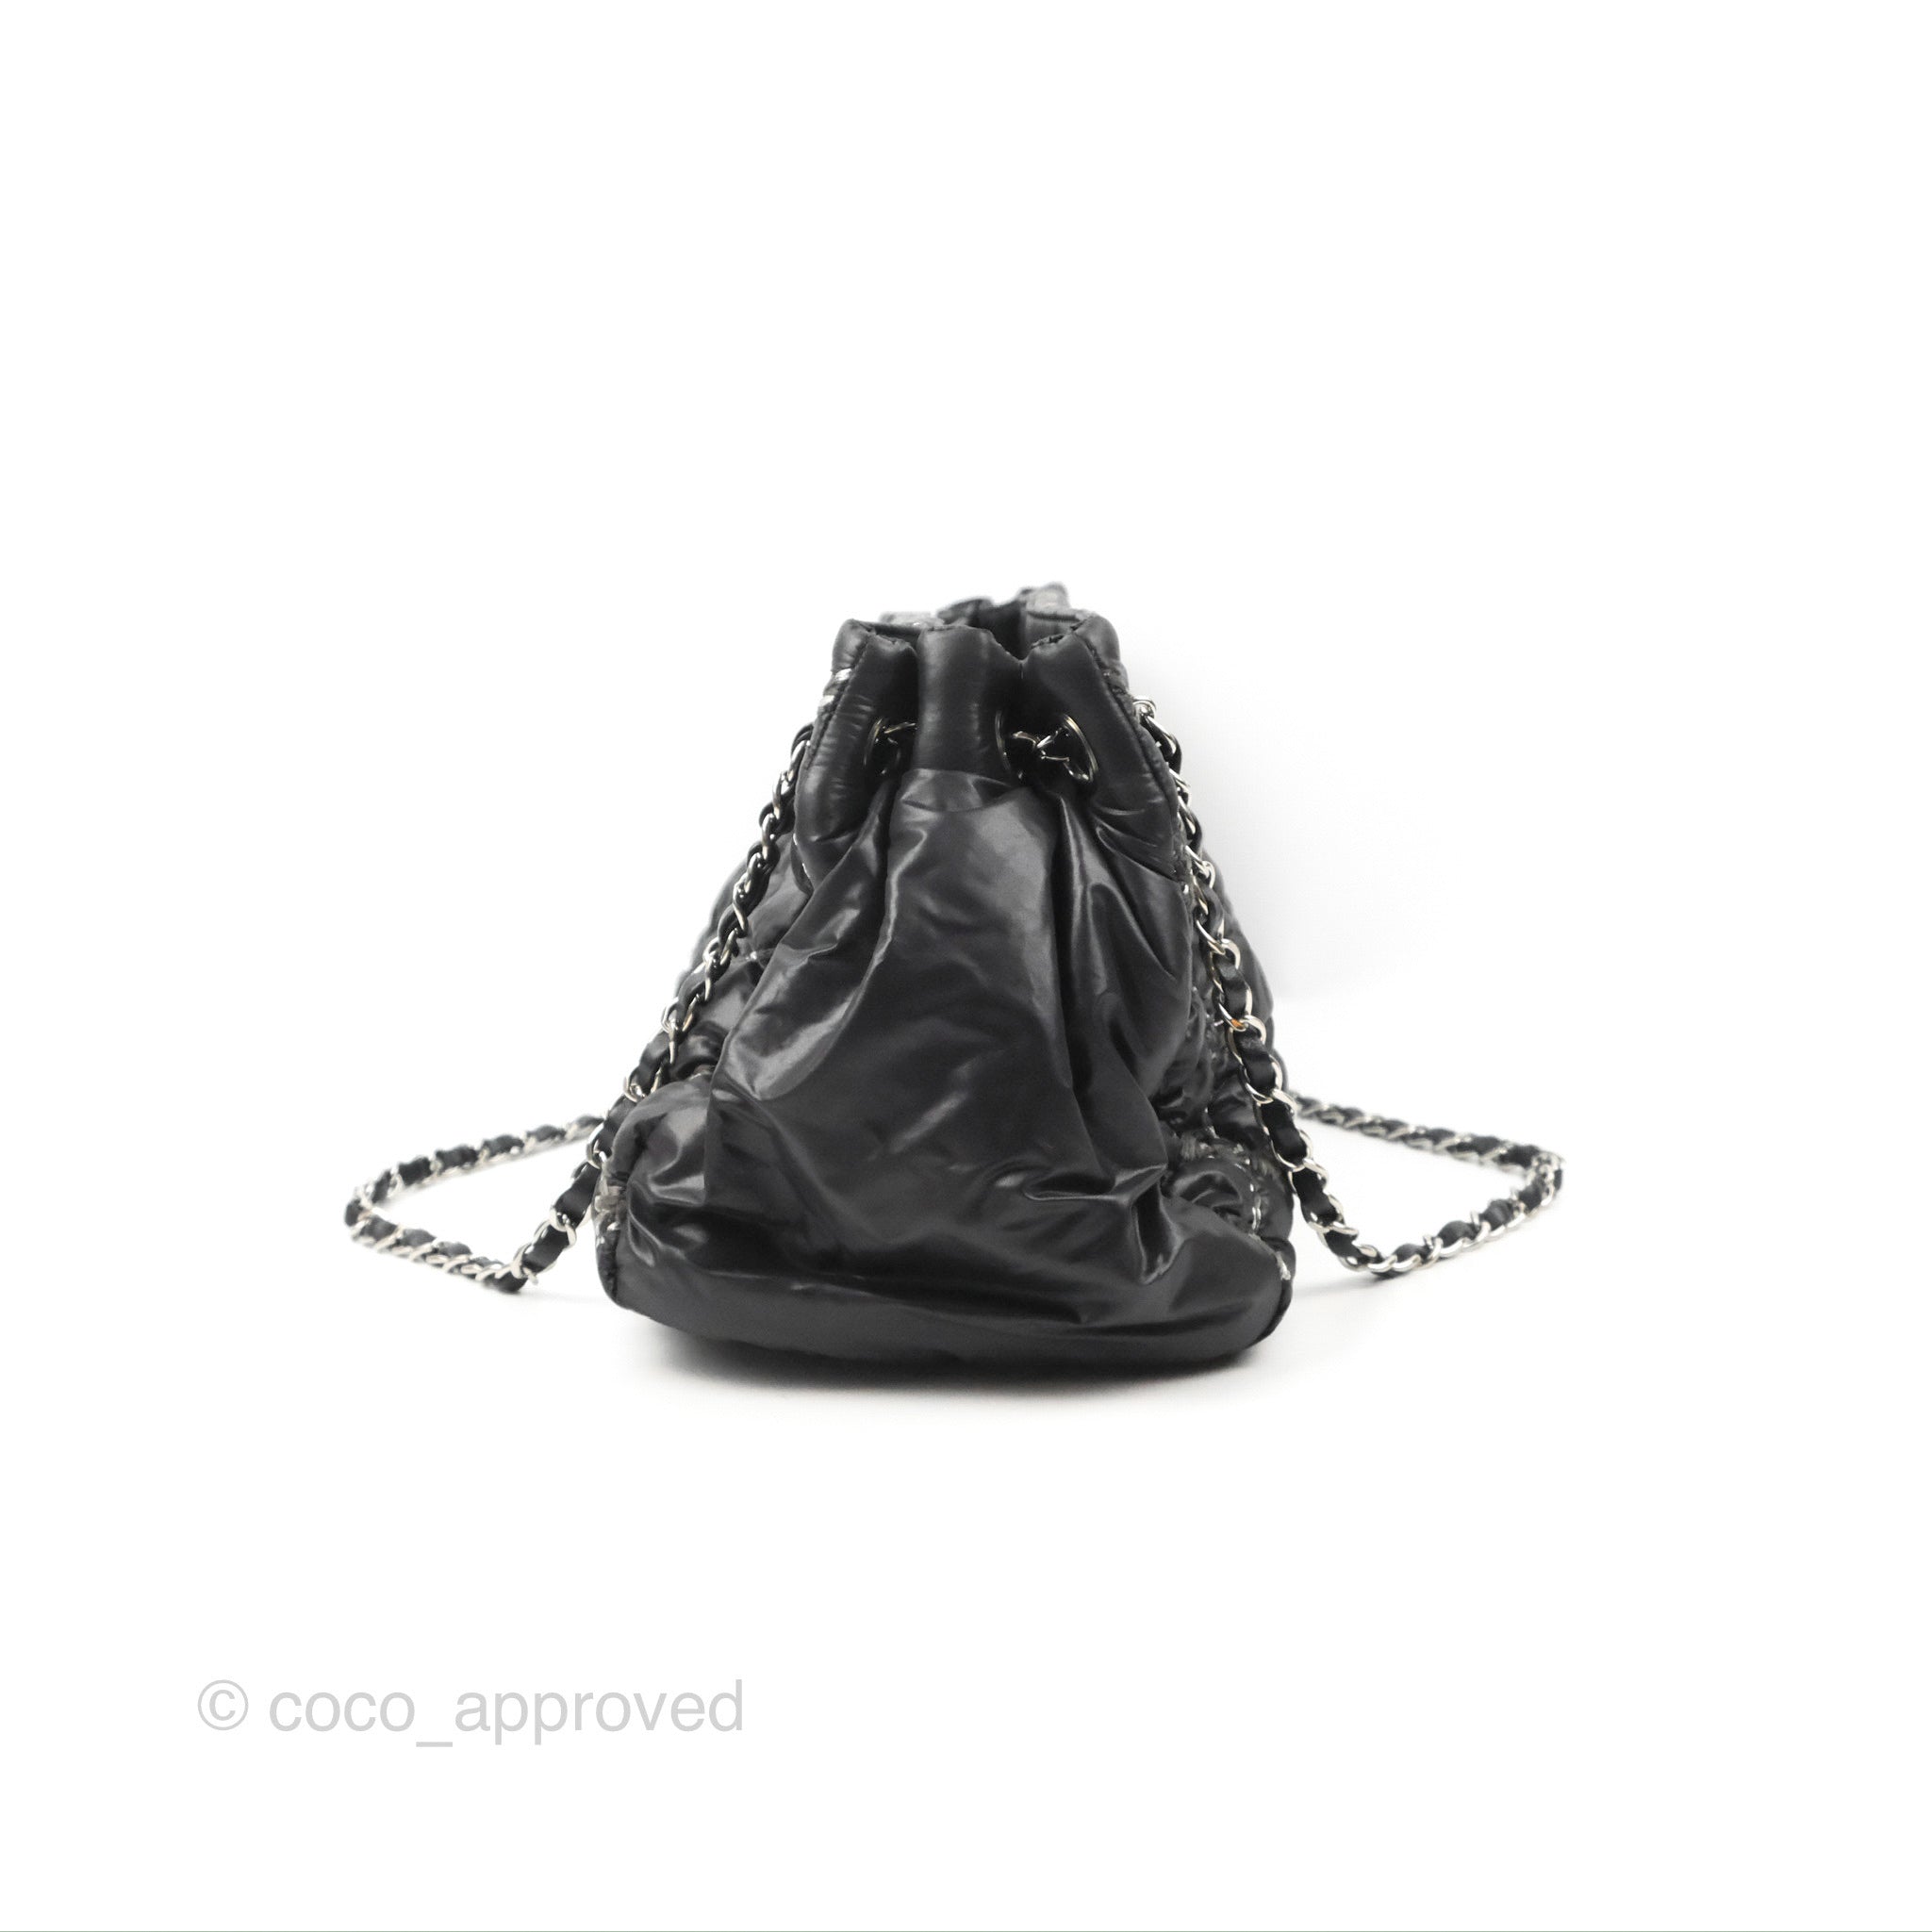 CHANEL Quilted Leather Drawstring Large Bucket Bag Black